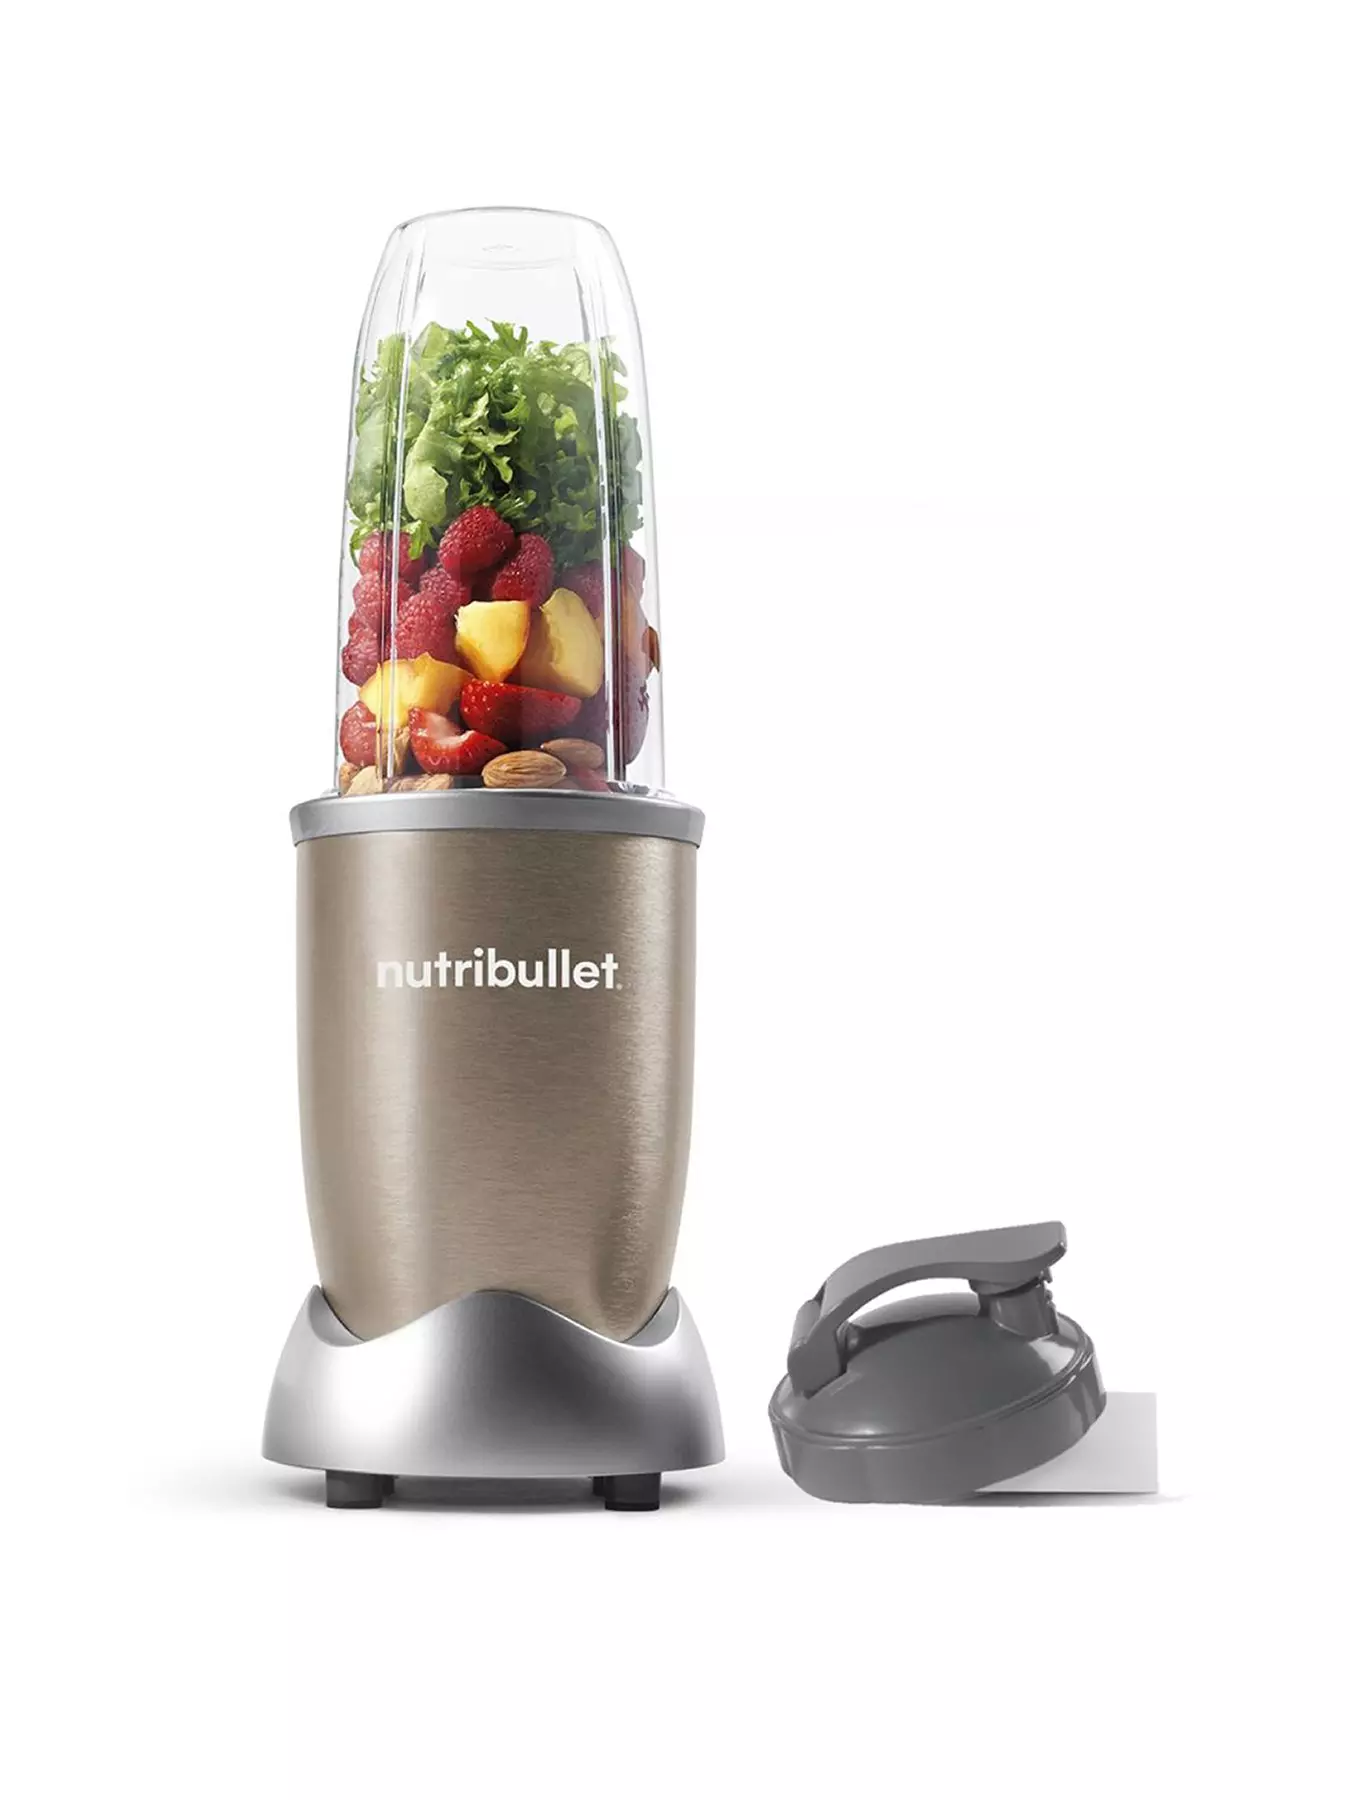 NutriBullet - Pro Plus 1200 Watt Personal Blender with Pulse Function  N12-1001 - Matte Black - Coupon Codes, Promo Codes, Daily Deals, Save Money  Today